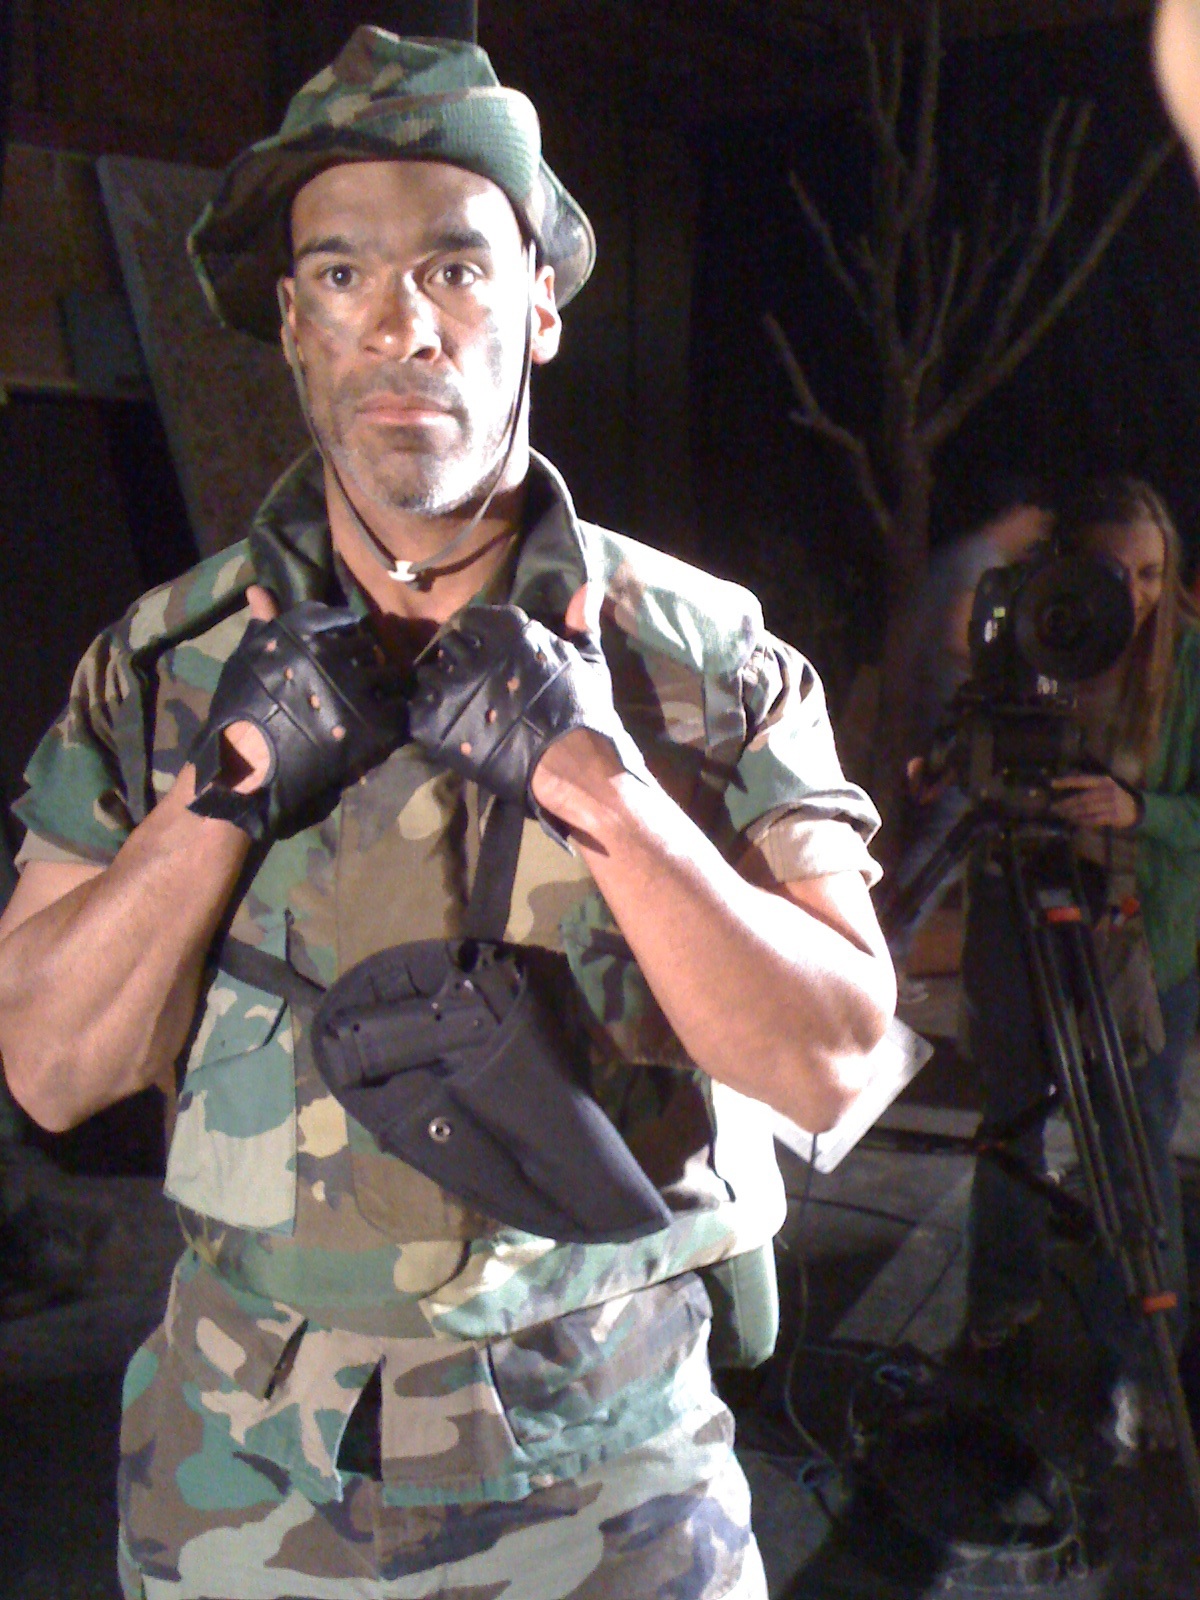 On set of Little Soldier.